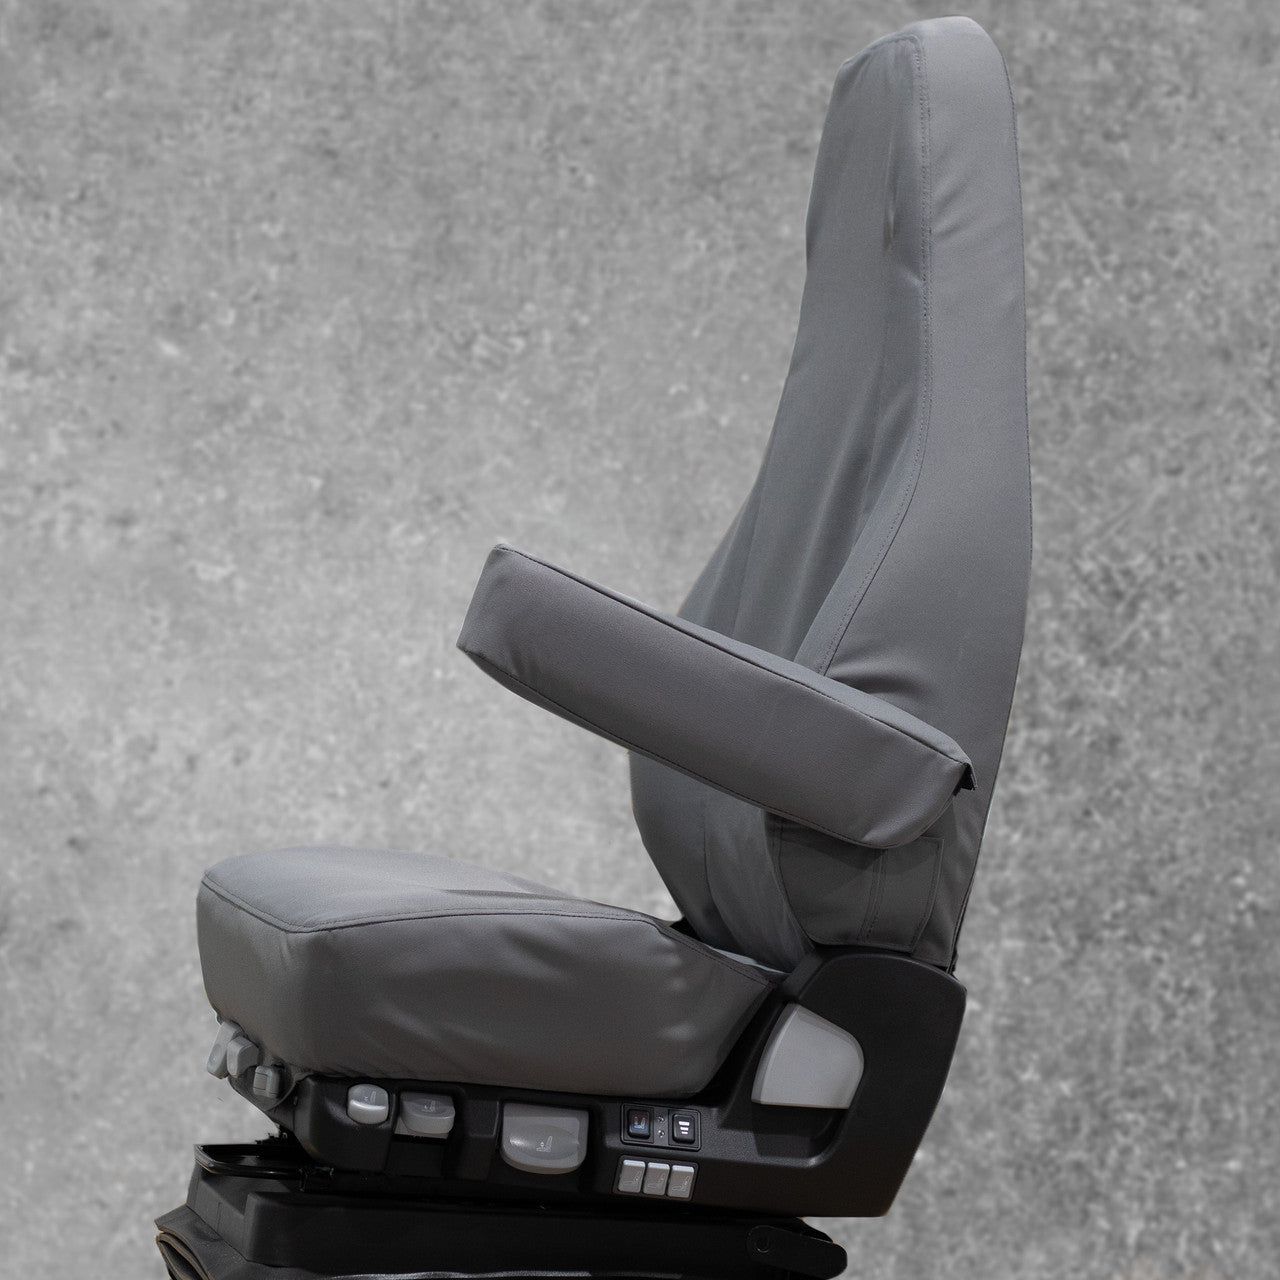 ISRI seat cover, perfect fitting durable cover.